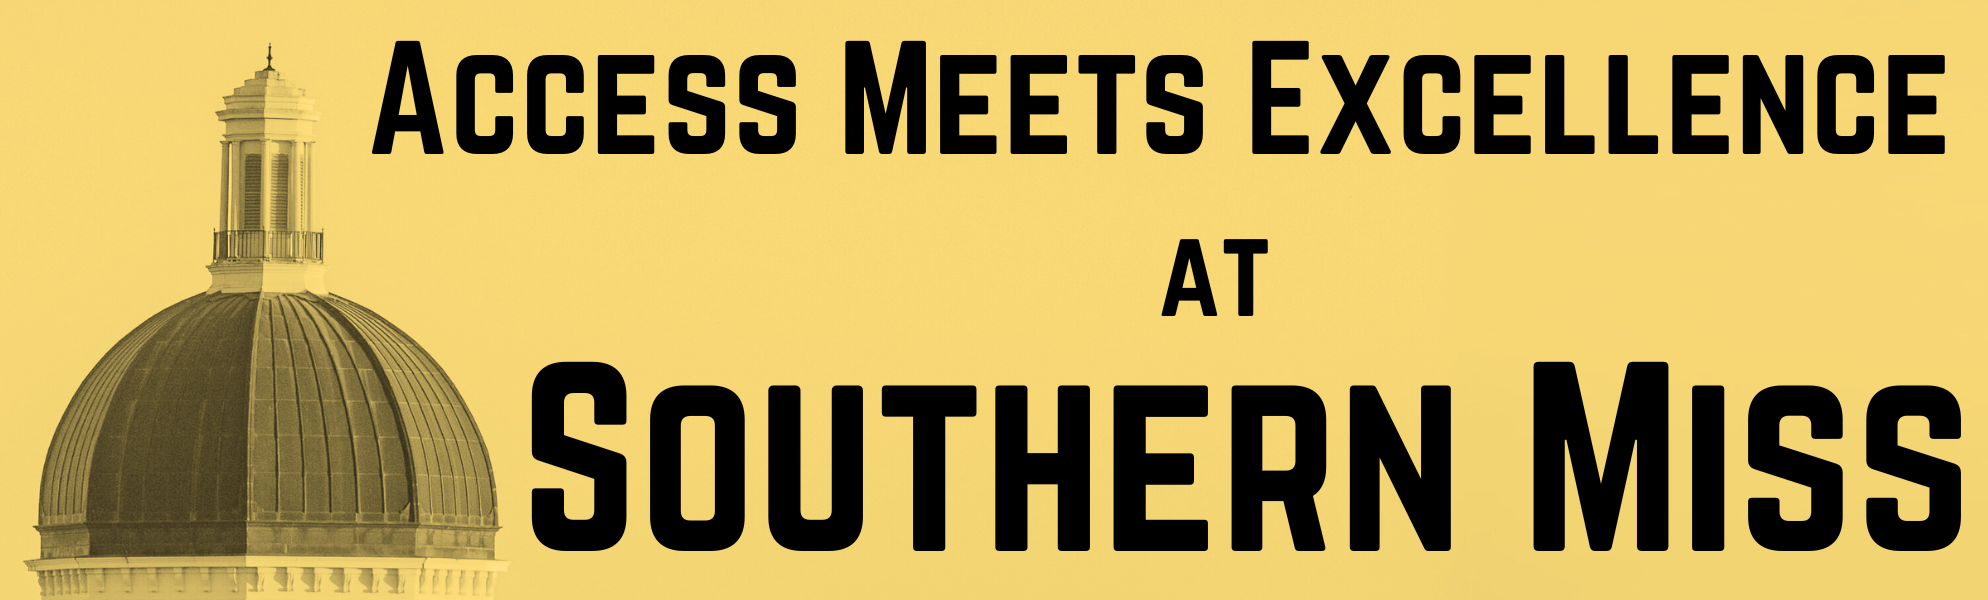 Access Meets Excellence at Southern Miss